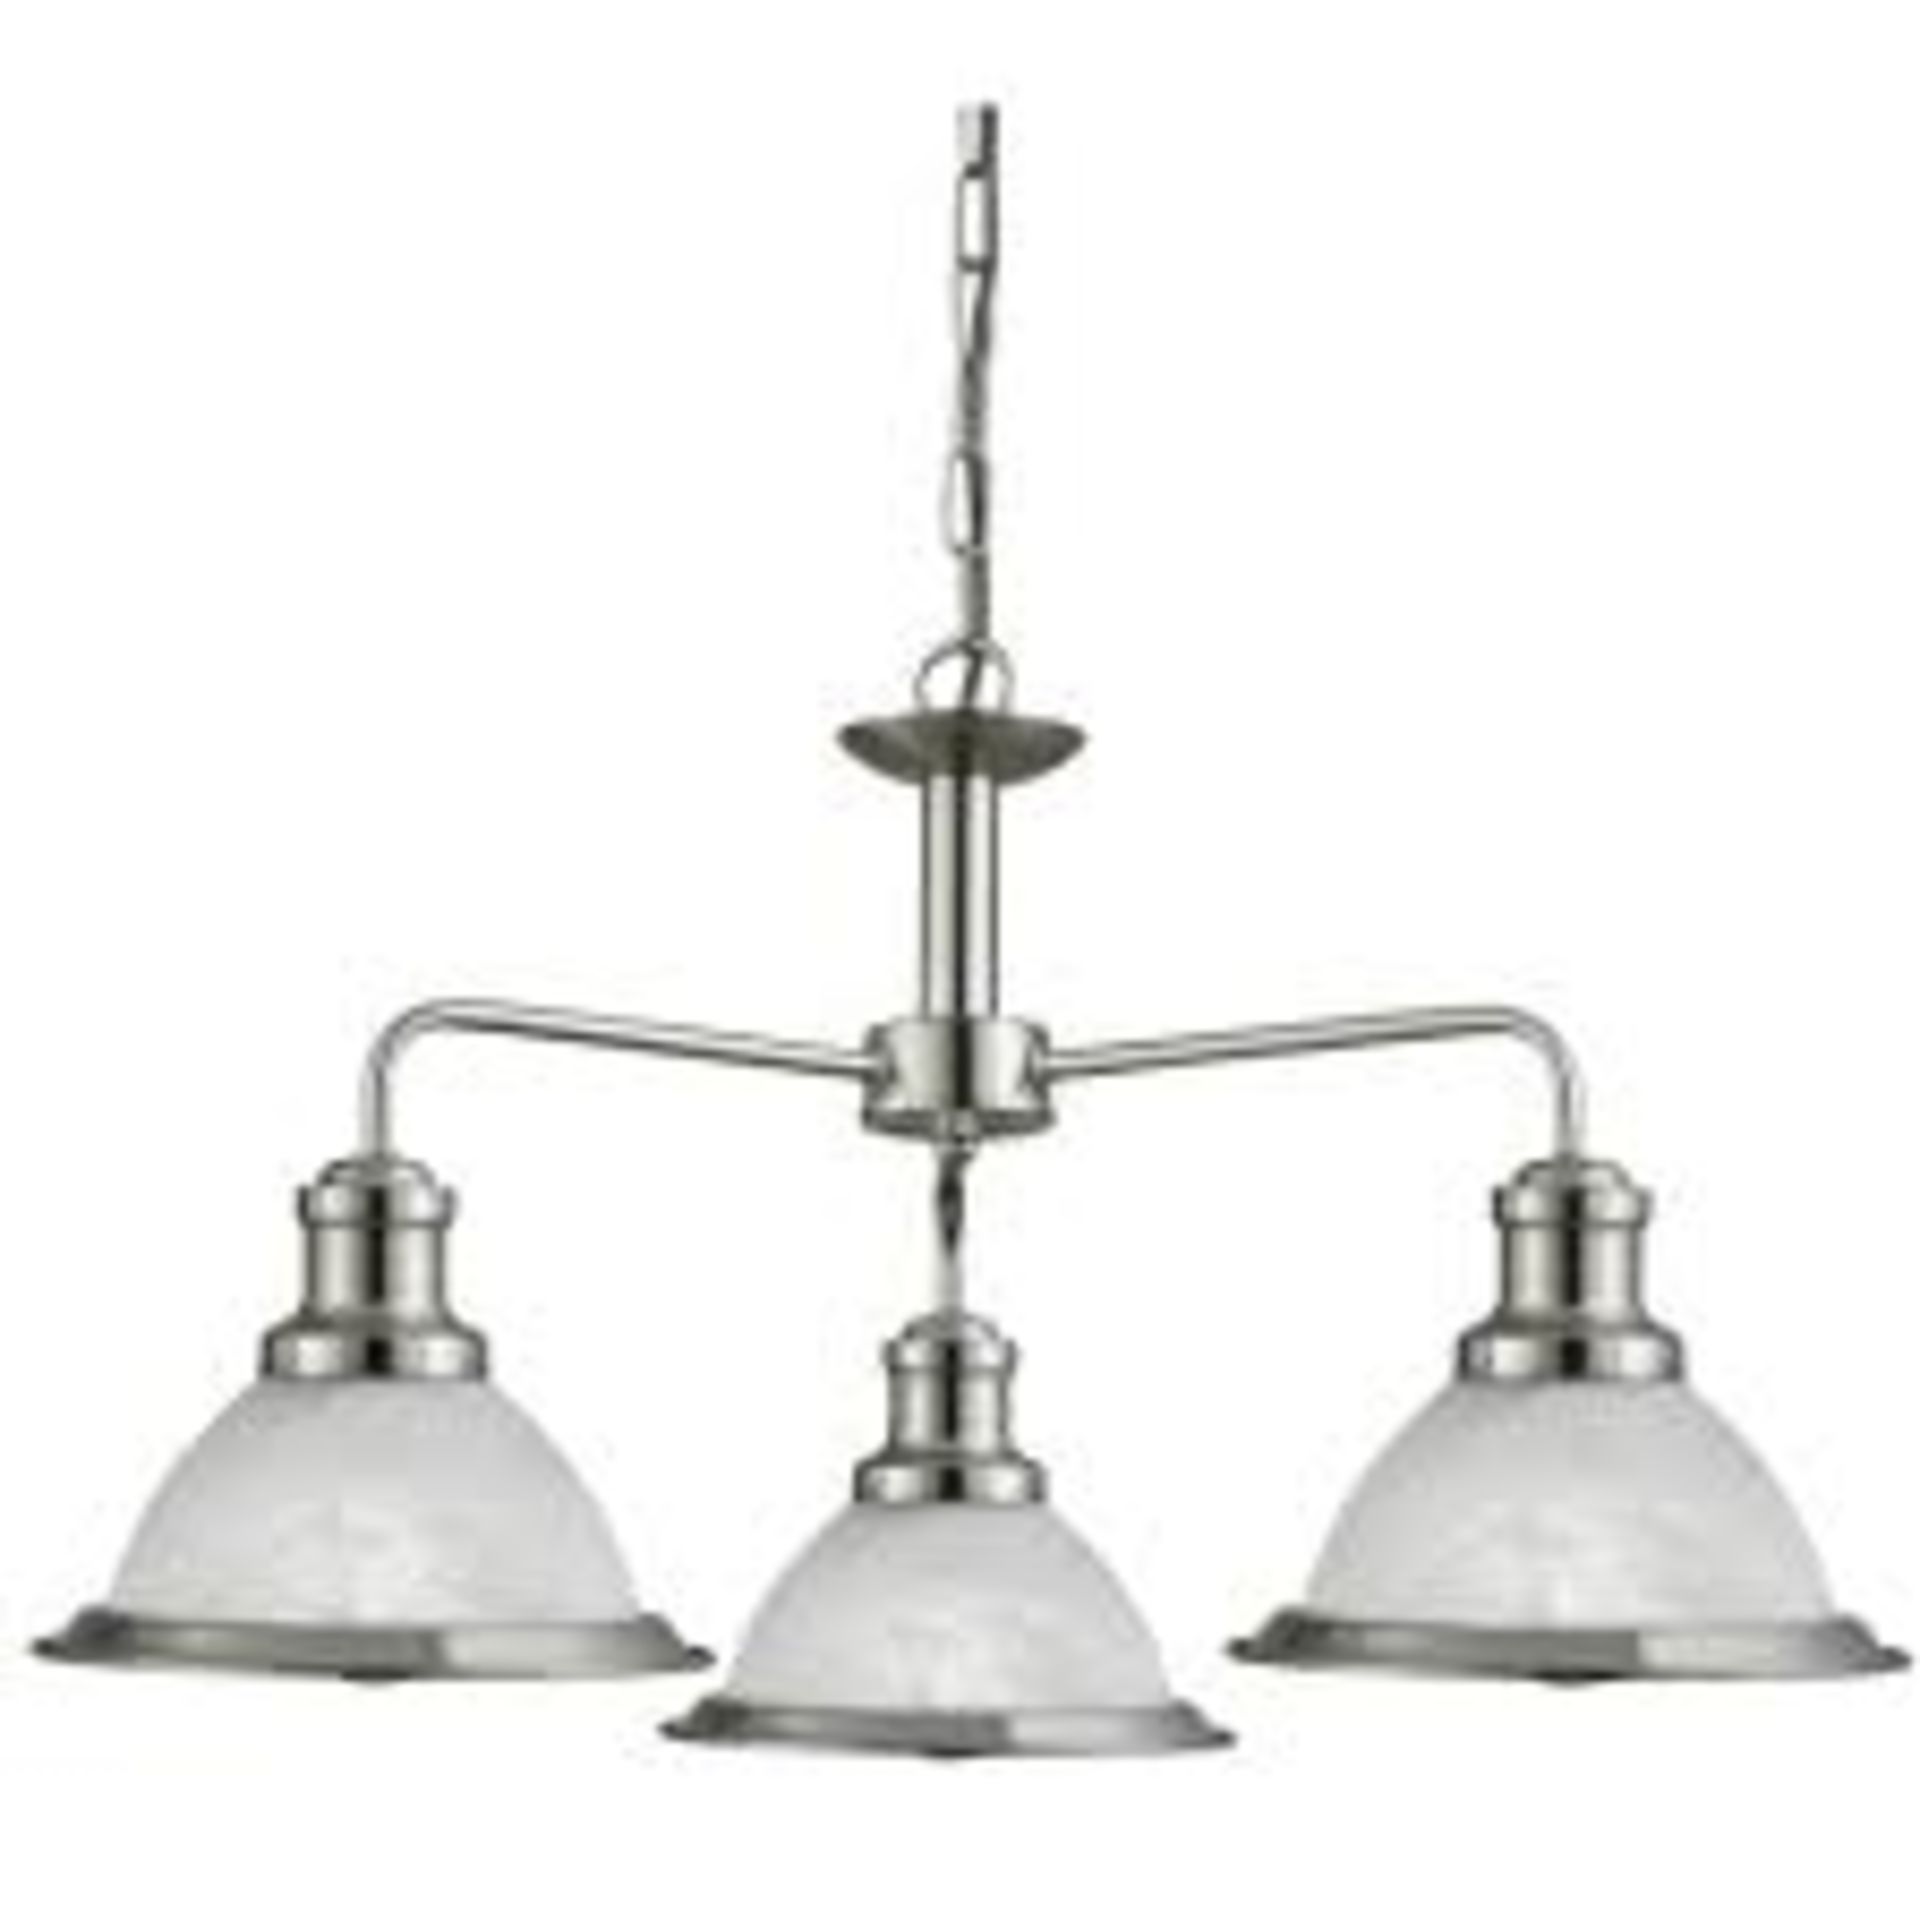 1 x Searchlight Industrial Ceiling Light in satin silver - Ref: 1593-3SS - New and Boxed - RRP: £10 - Image 4 of 4